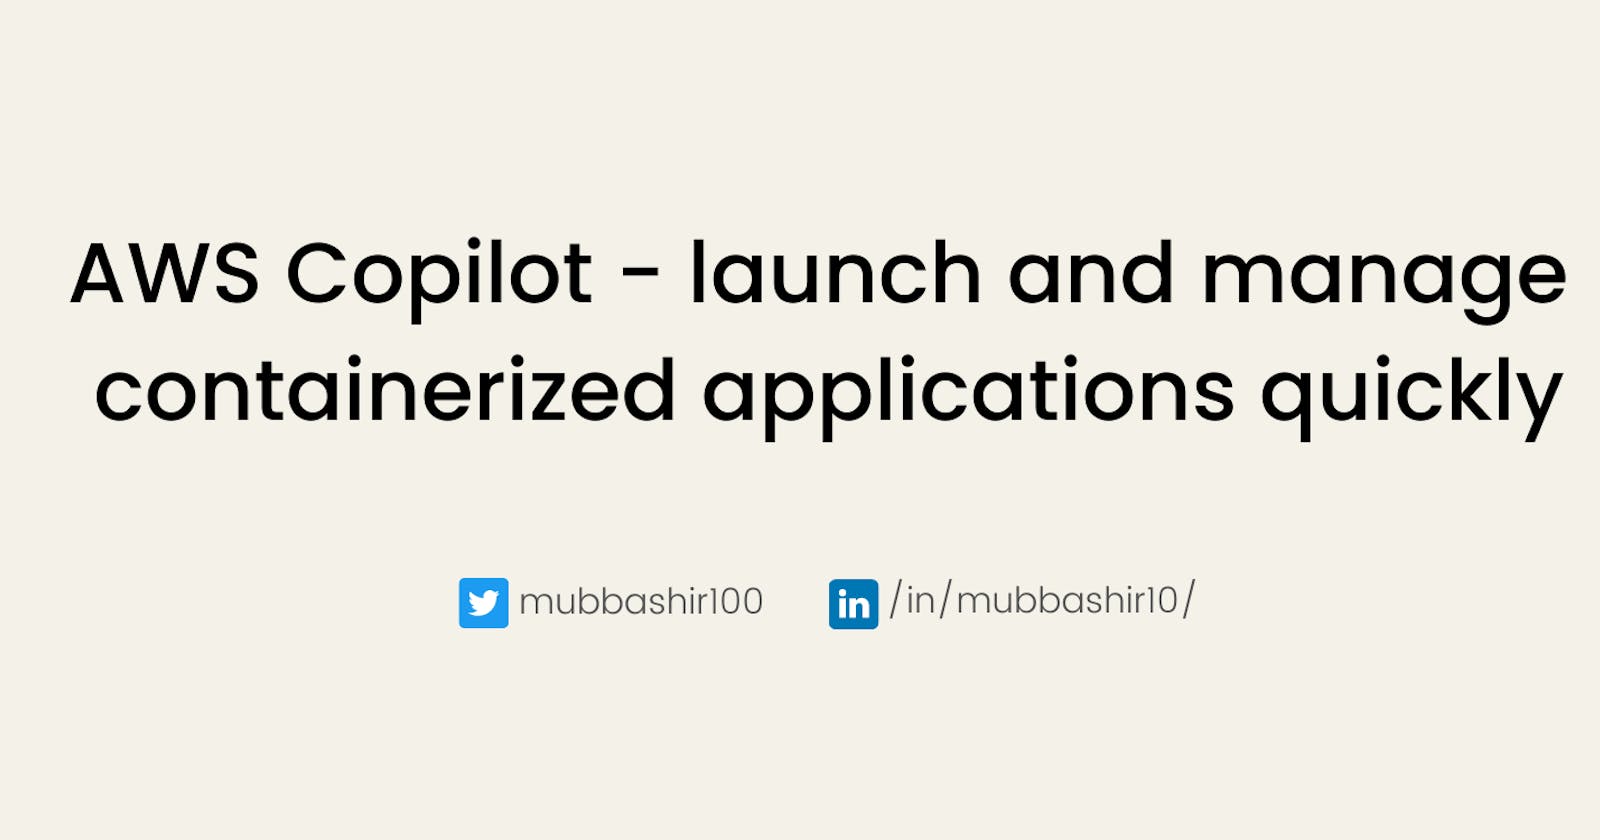 AWS Copilot - launch and manage containerized applications quickly 🐳